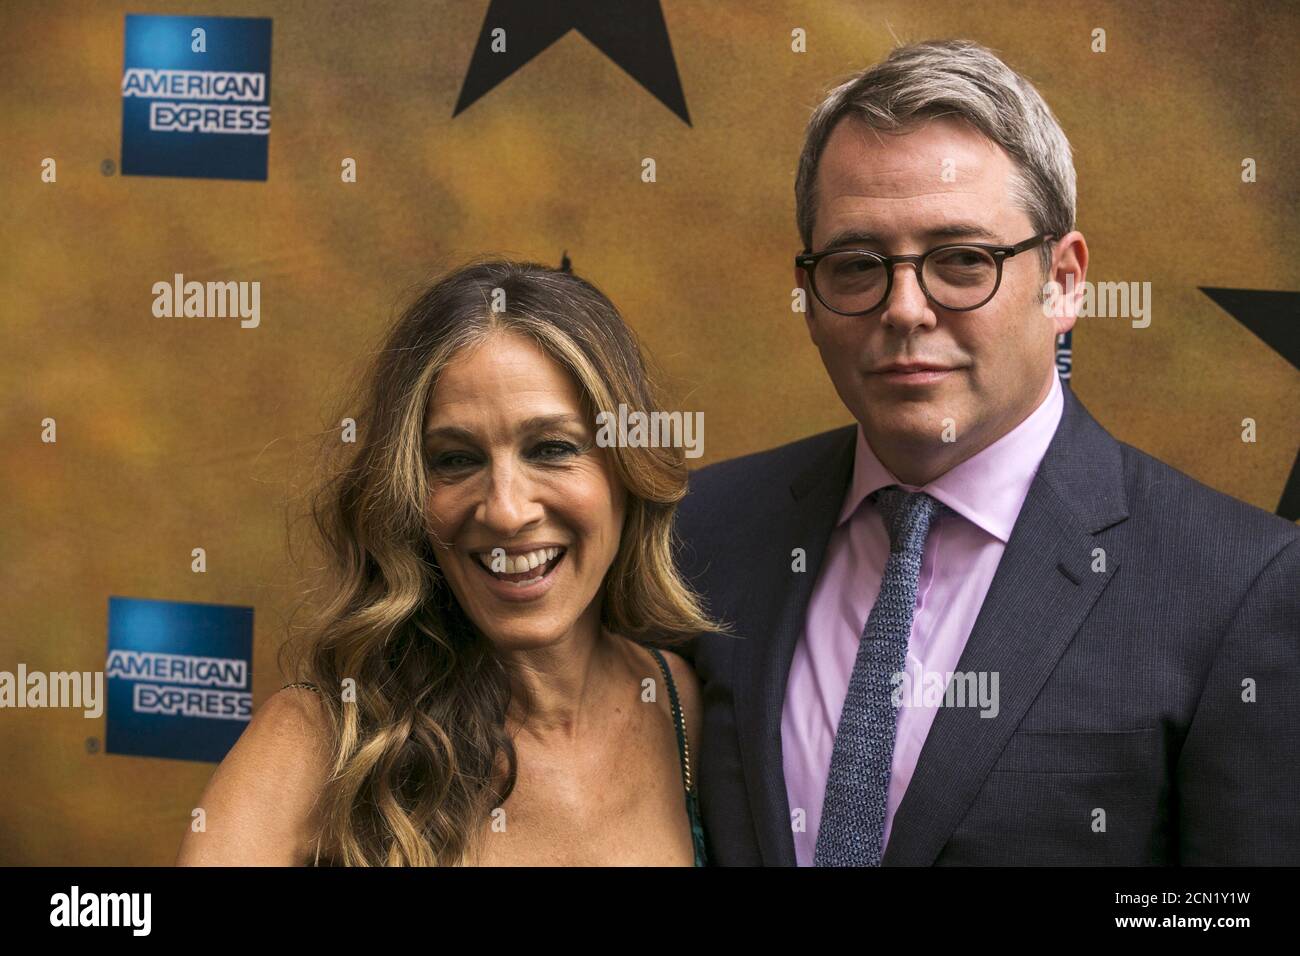 Actress Sarah Jessica Parker arrives with her husband, Matthew Broderick, for the opening night of the musical play 'Hamilton,' on Broadway in New York August 6, 2015.  REUTERS/Lucas Jackson Stock Photo